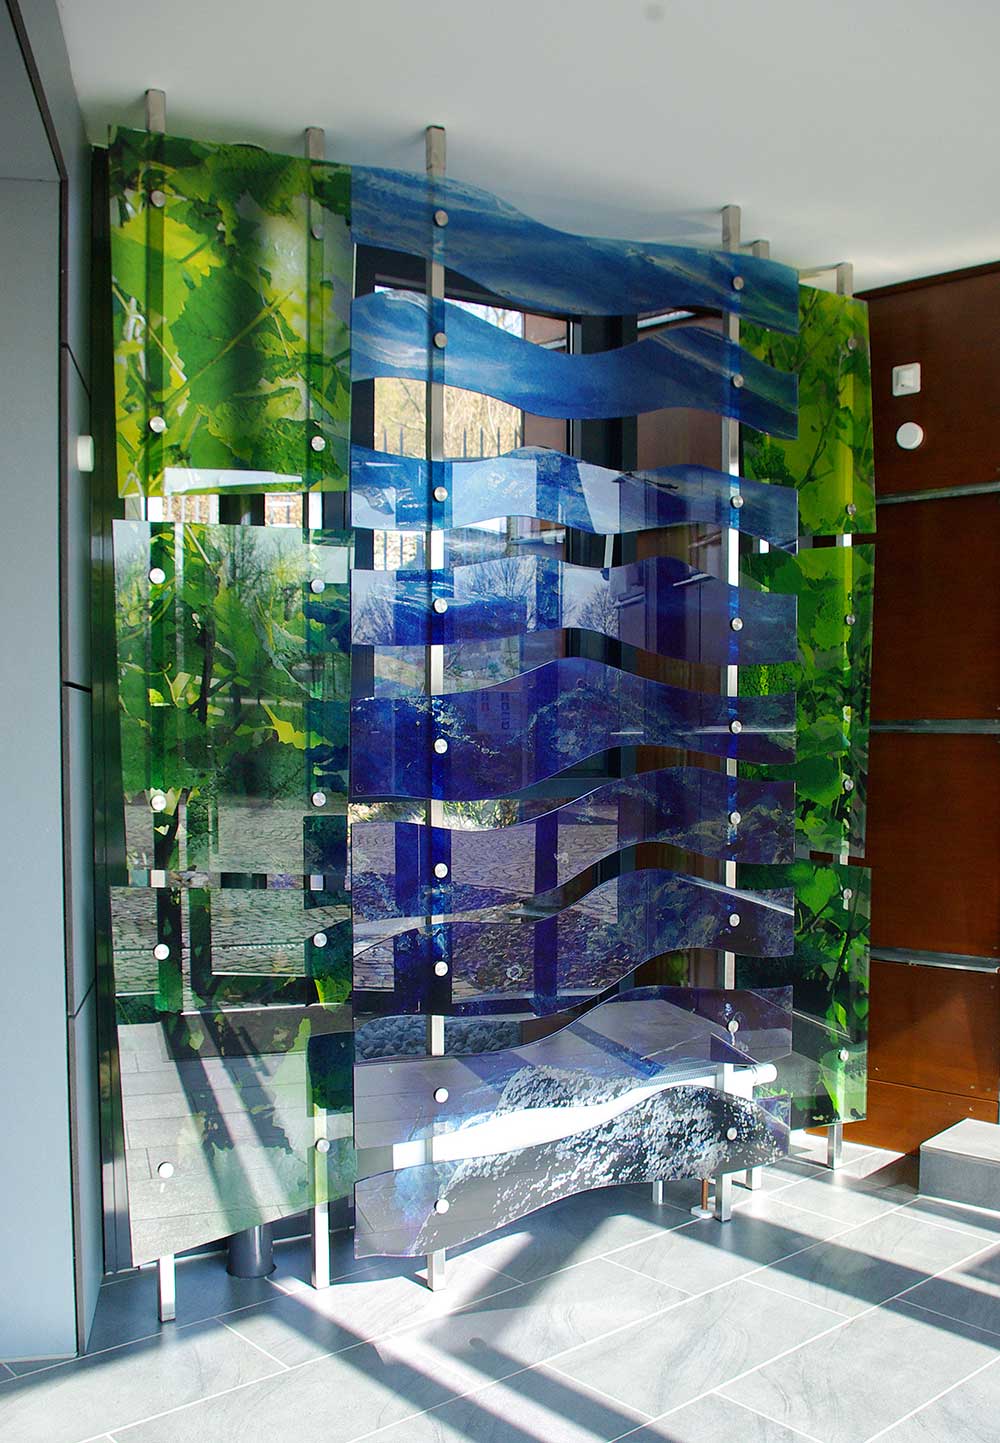 Art and public glass. Freely mounted glass panels attached to a stainless-steel frame in front of a window front. The panels on the right and left represent wine leaves. The curved panels in the middle represent the flowing water of the river Rhein. They are printed transparently and play with the light of the window front.